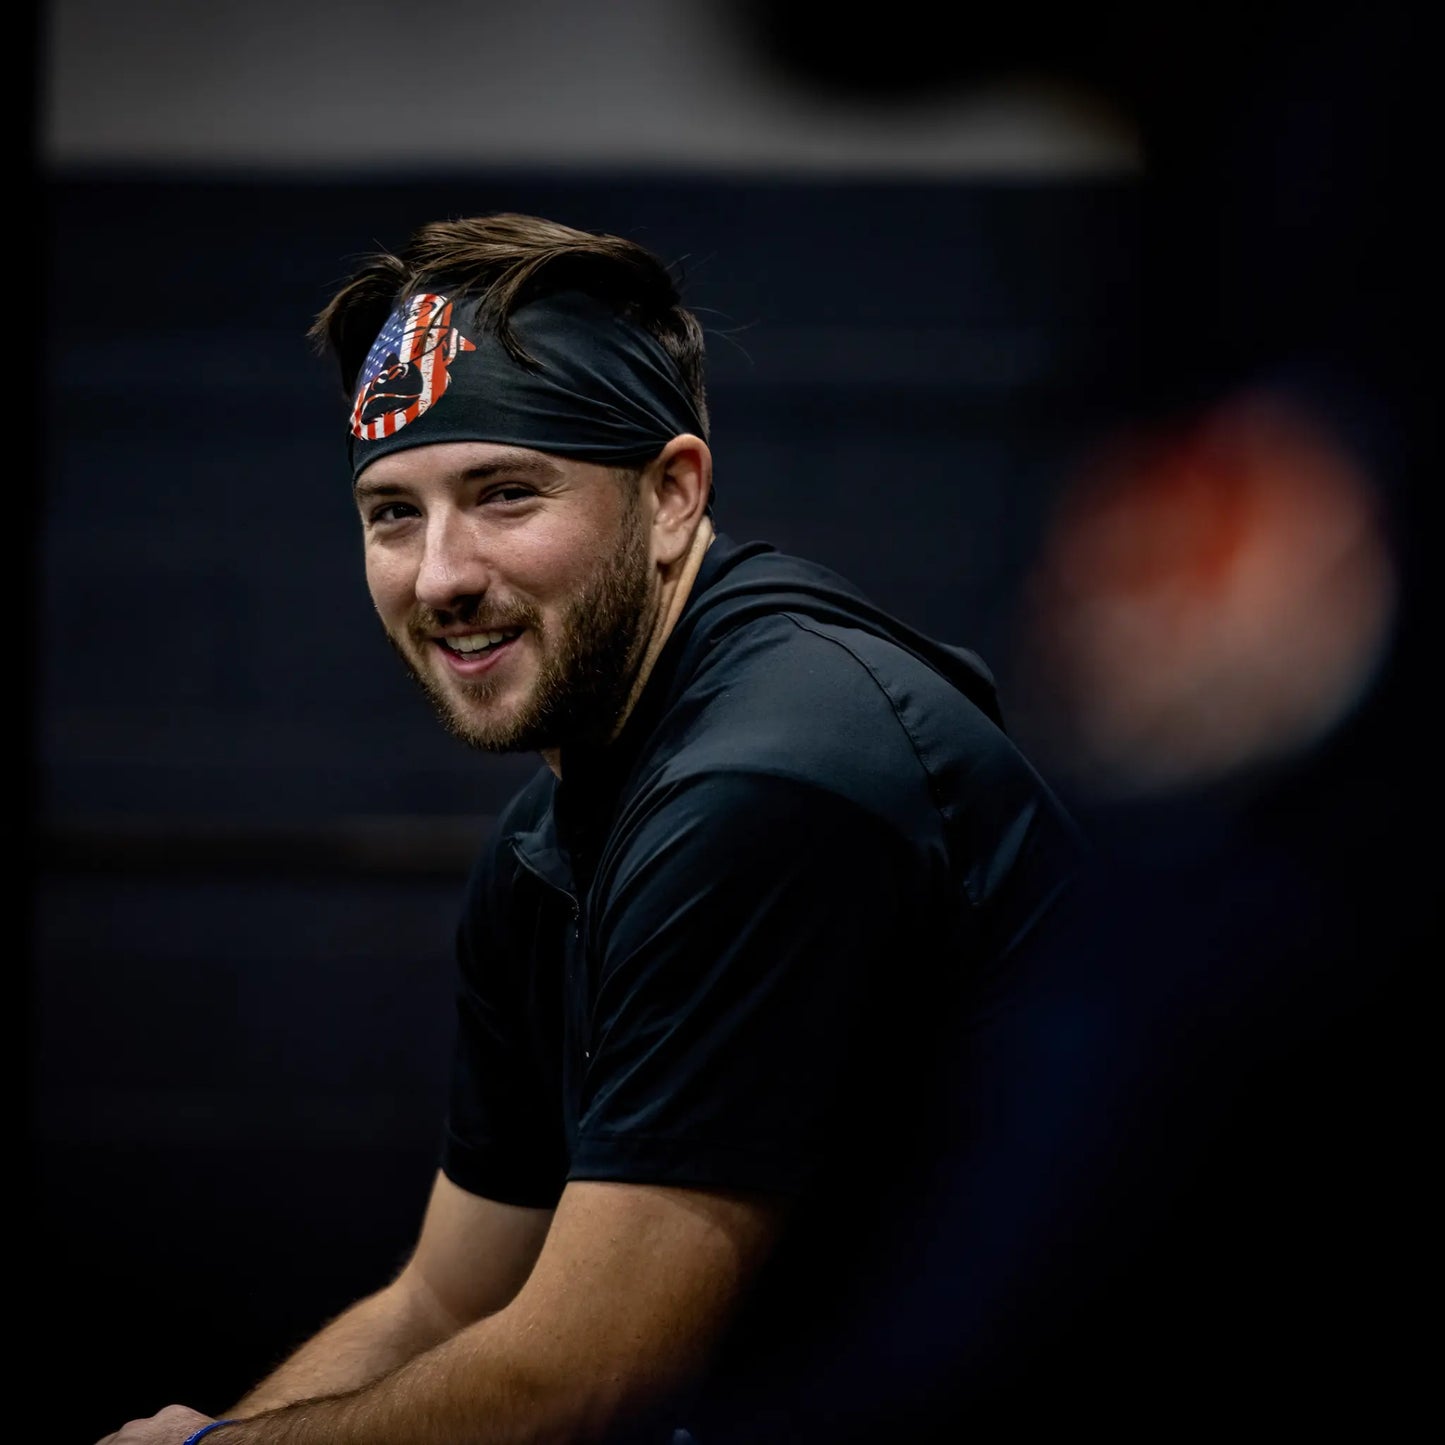 Smiling athlete wearing Tater Baseball's black headband with a bold USA flag Kong design, providing both performance and patriotic style during training.